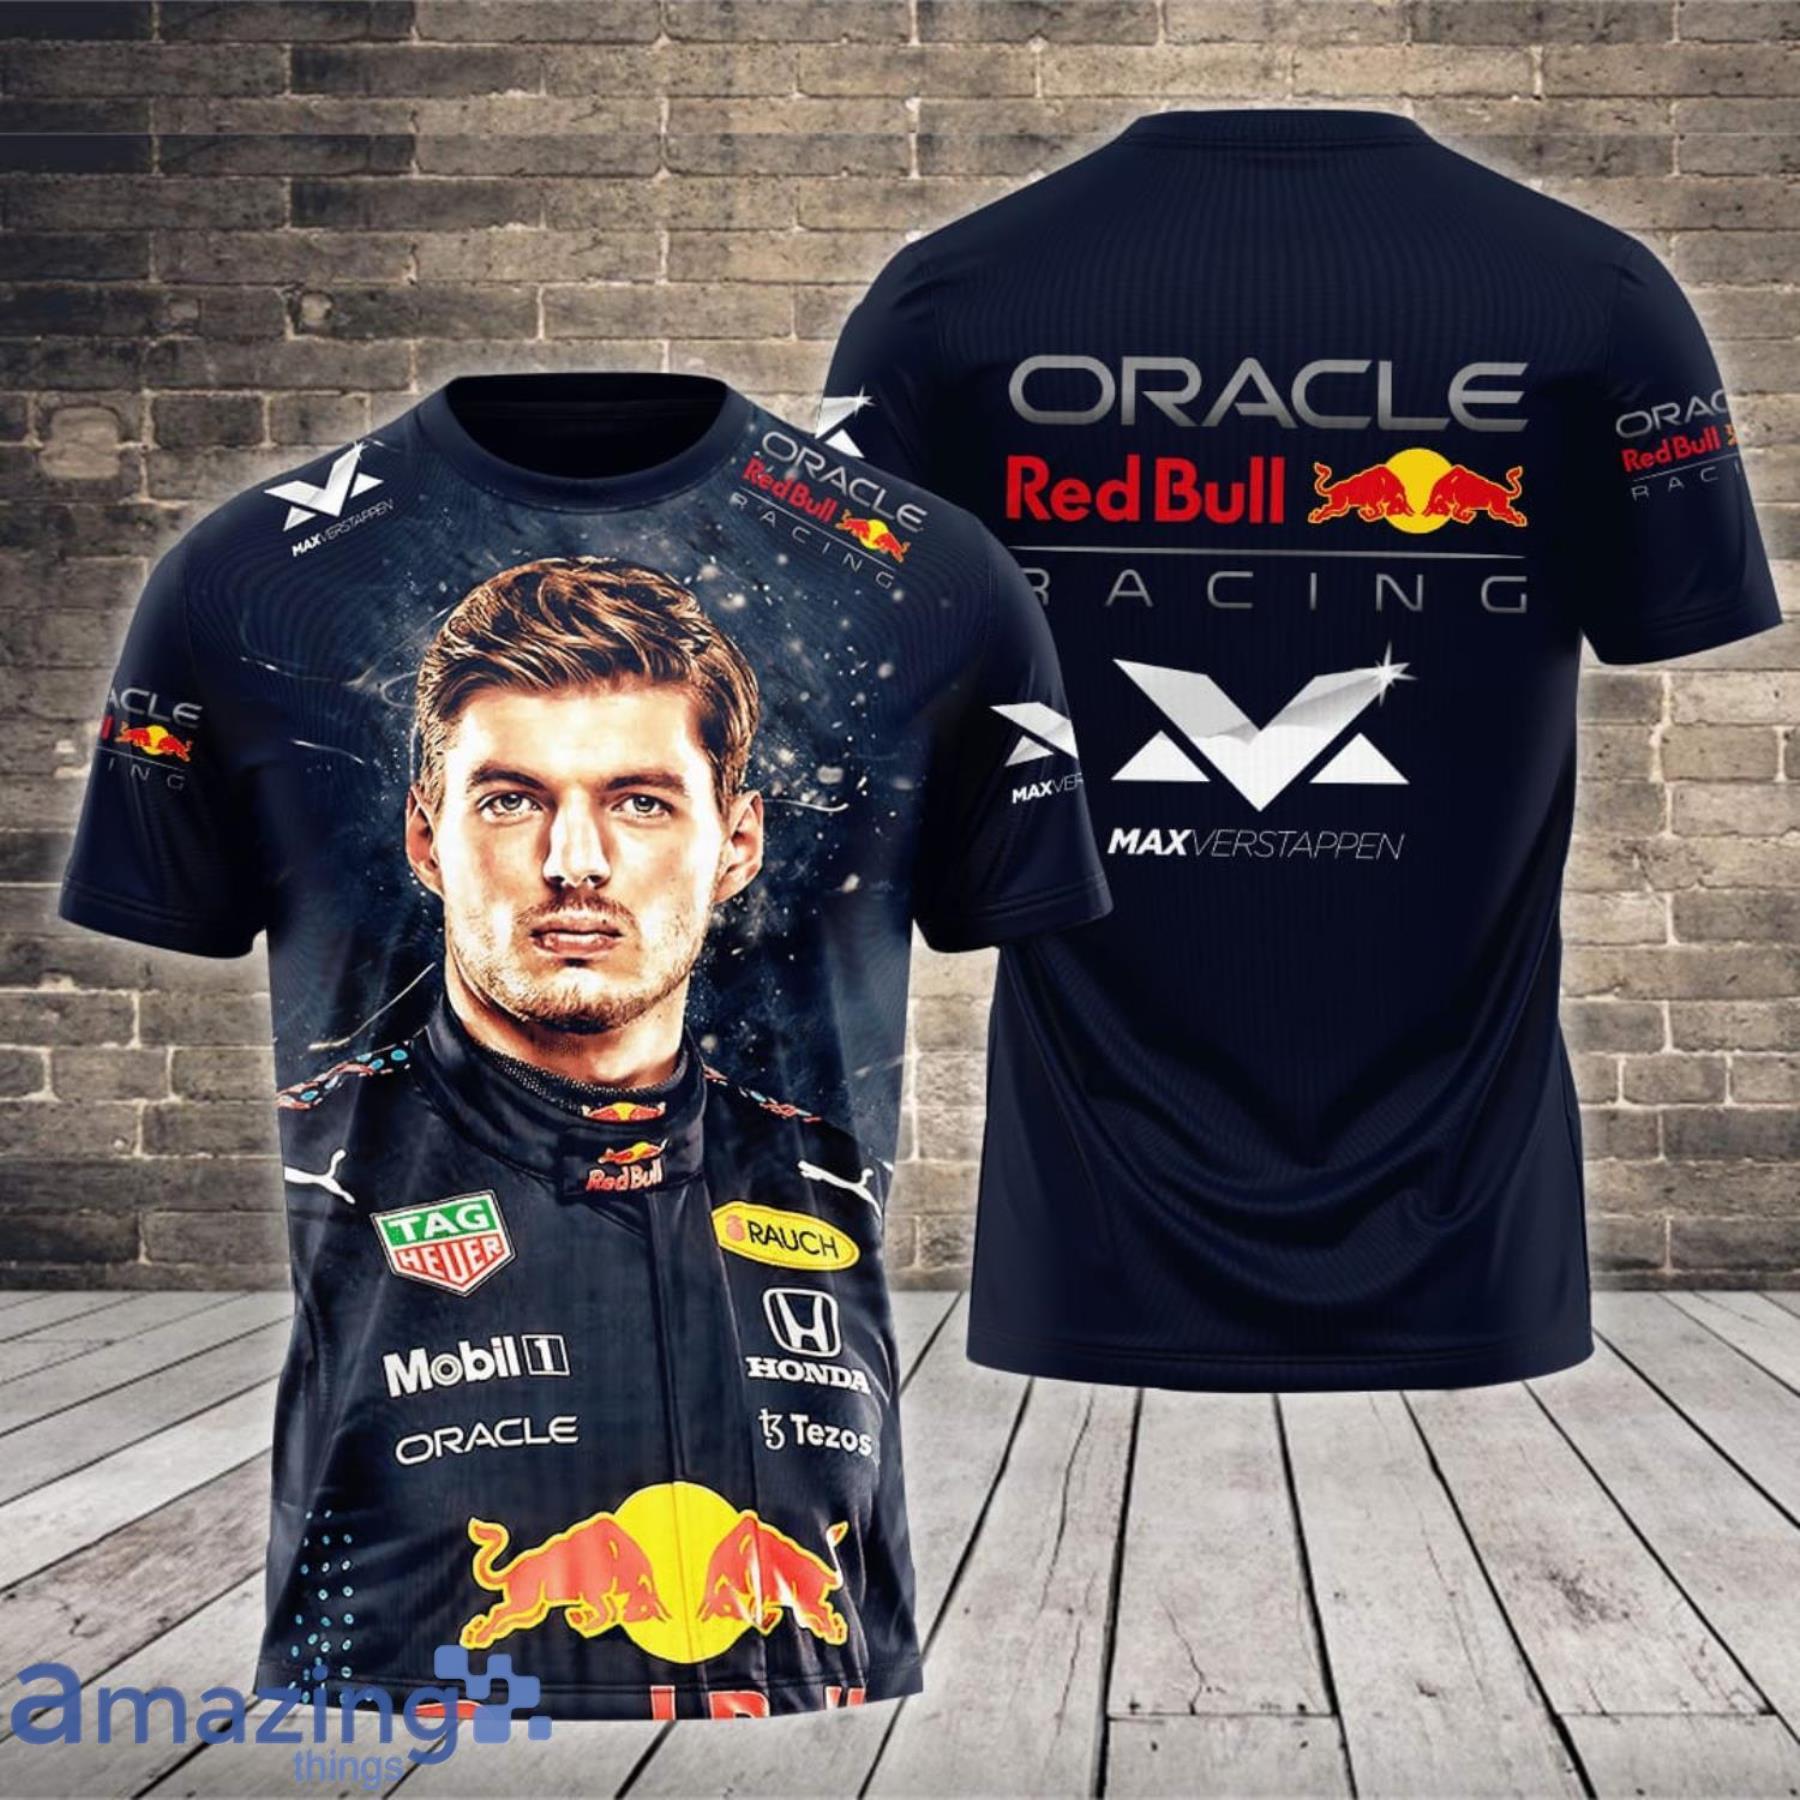 Max Verstappen T-Shirts for Sale